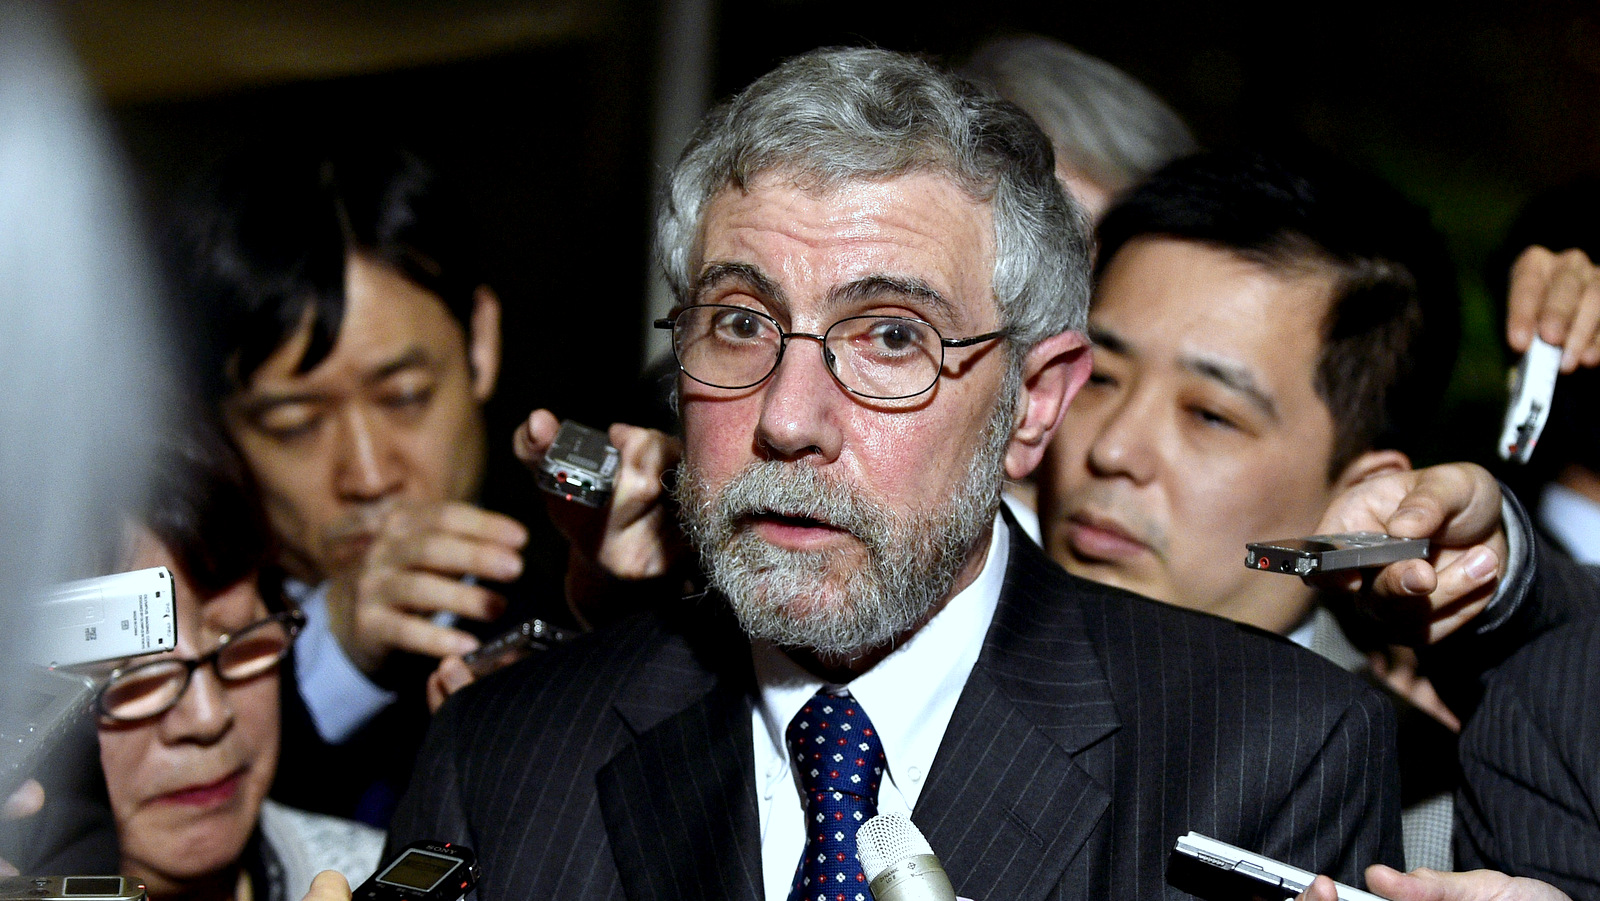 US economist Paul Krugman, shown here after his meeting with Japanese Prime Minister Shinzo Abe, recently unleashed a no holds barred  tirade against Bernie Sanders. (Franck Robichon/Pool Photo via AP)